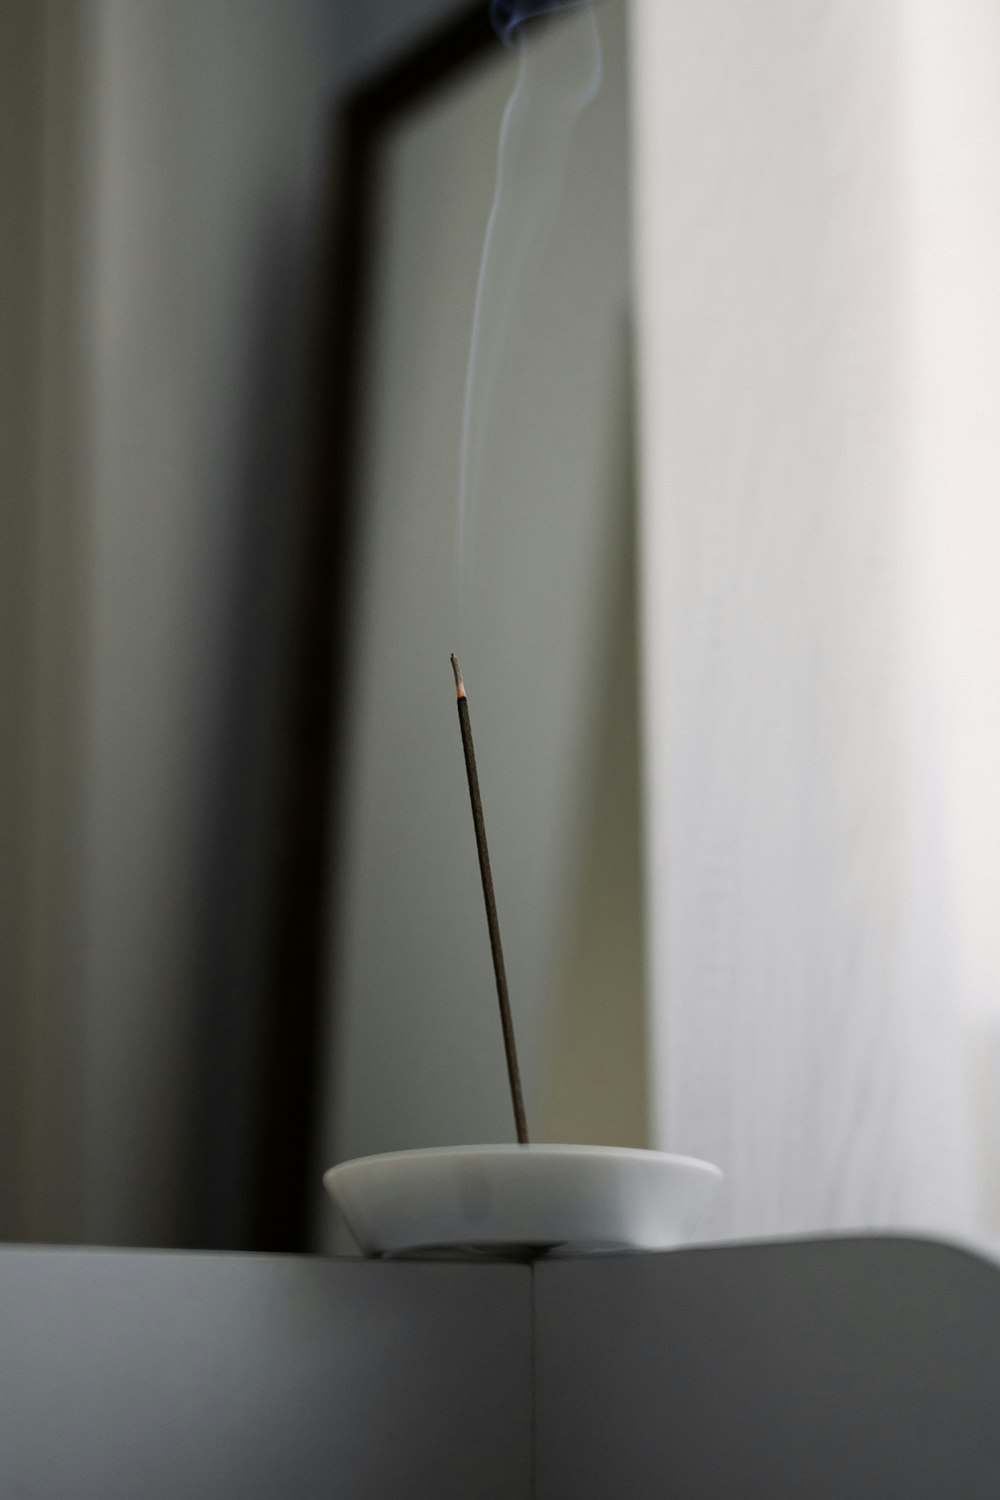 a bowl with a match stick sticking out of it